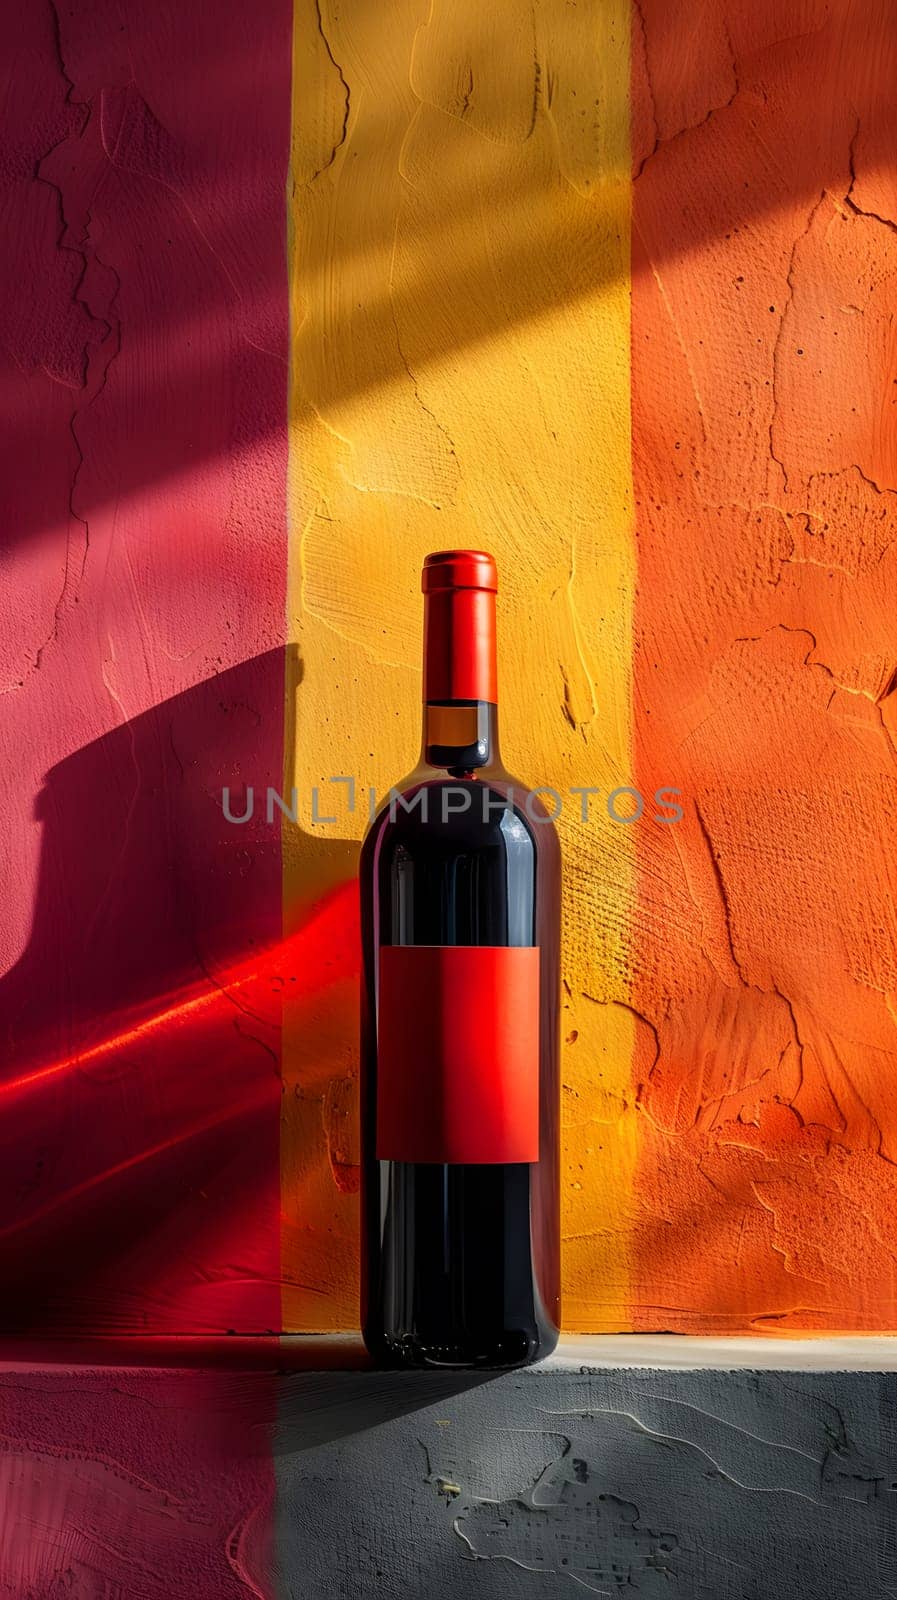 A glass bottle of red wine with a cork stopper is displayed on a table against a colorful wall, ready to be poured into drinkware for a delicious meal